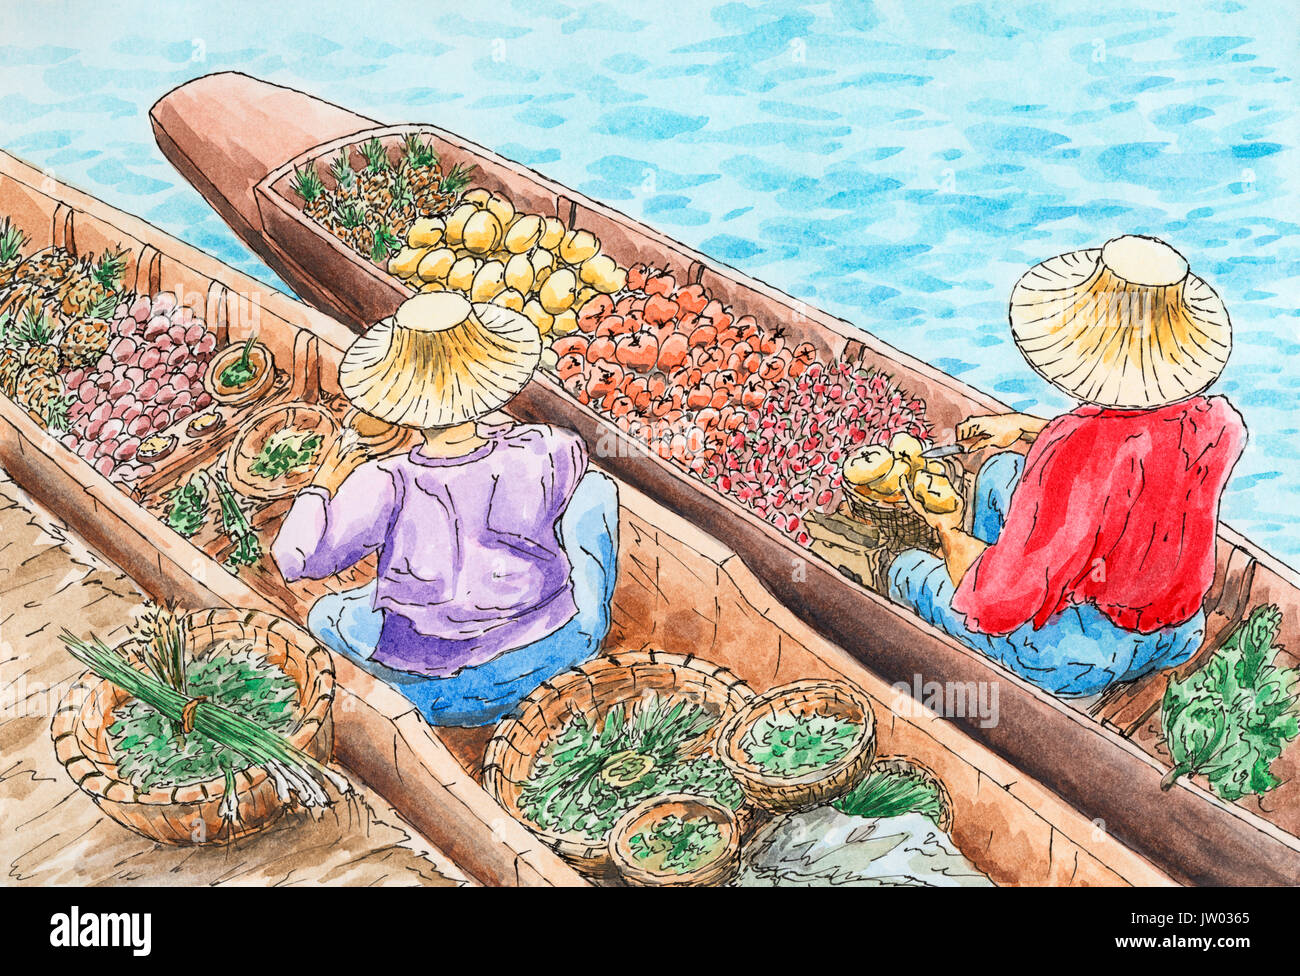 Thai traditional floating market. Two persons selling fruit and vegetables from a boats. Ink and watercolor on rough paper. Stock Photo